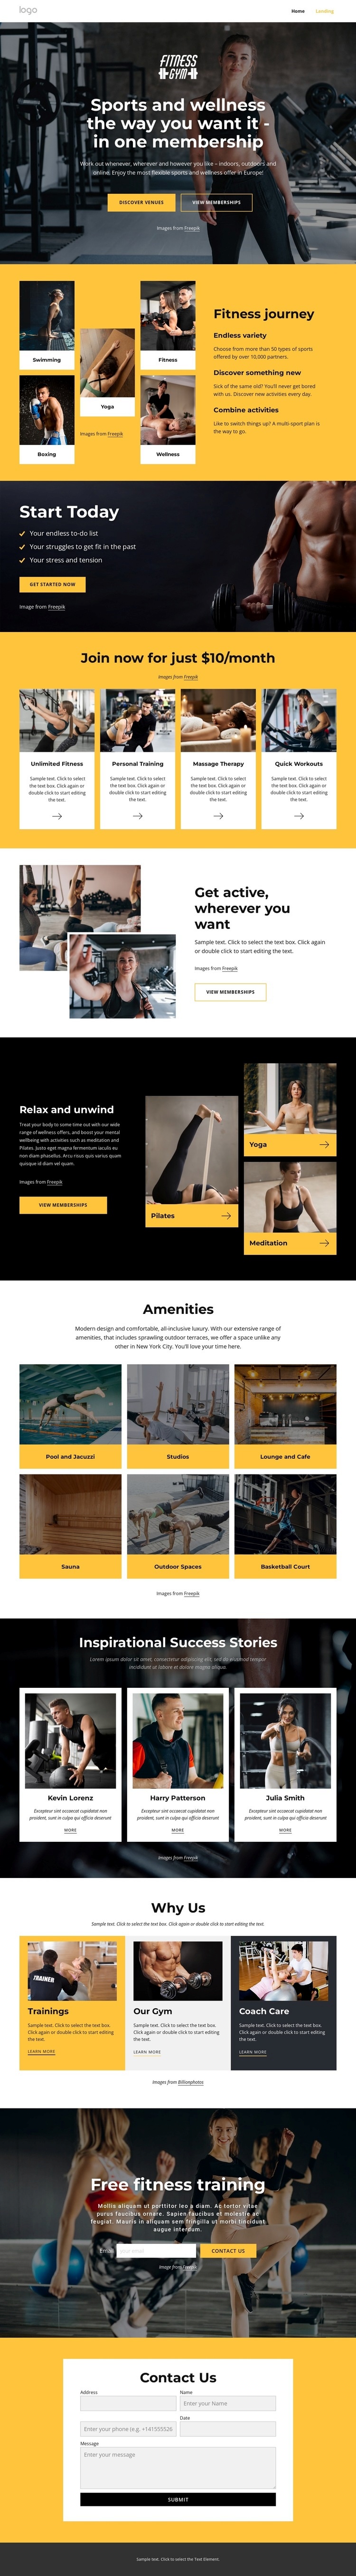 Gym, swimming, fitness classes Wix Template Alternative